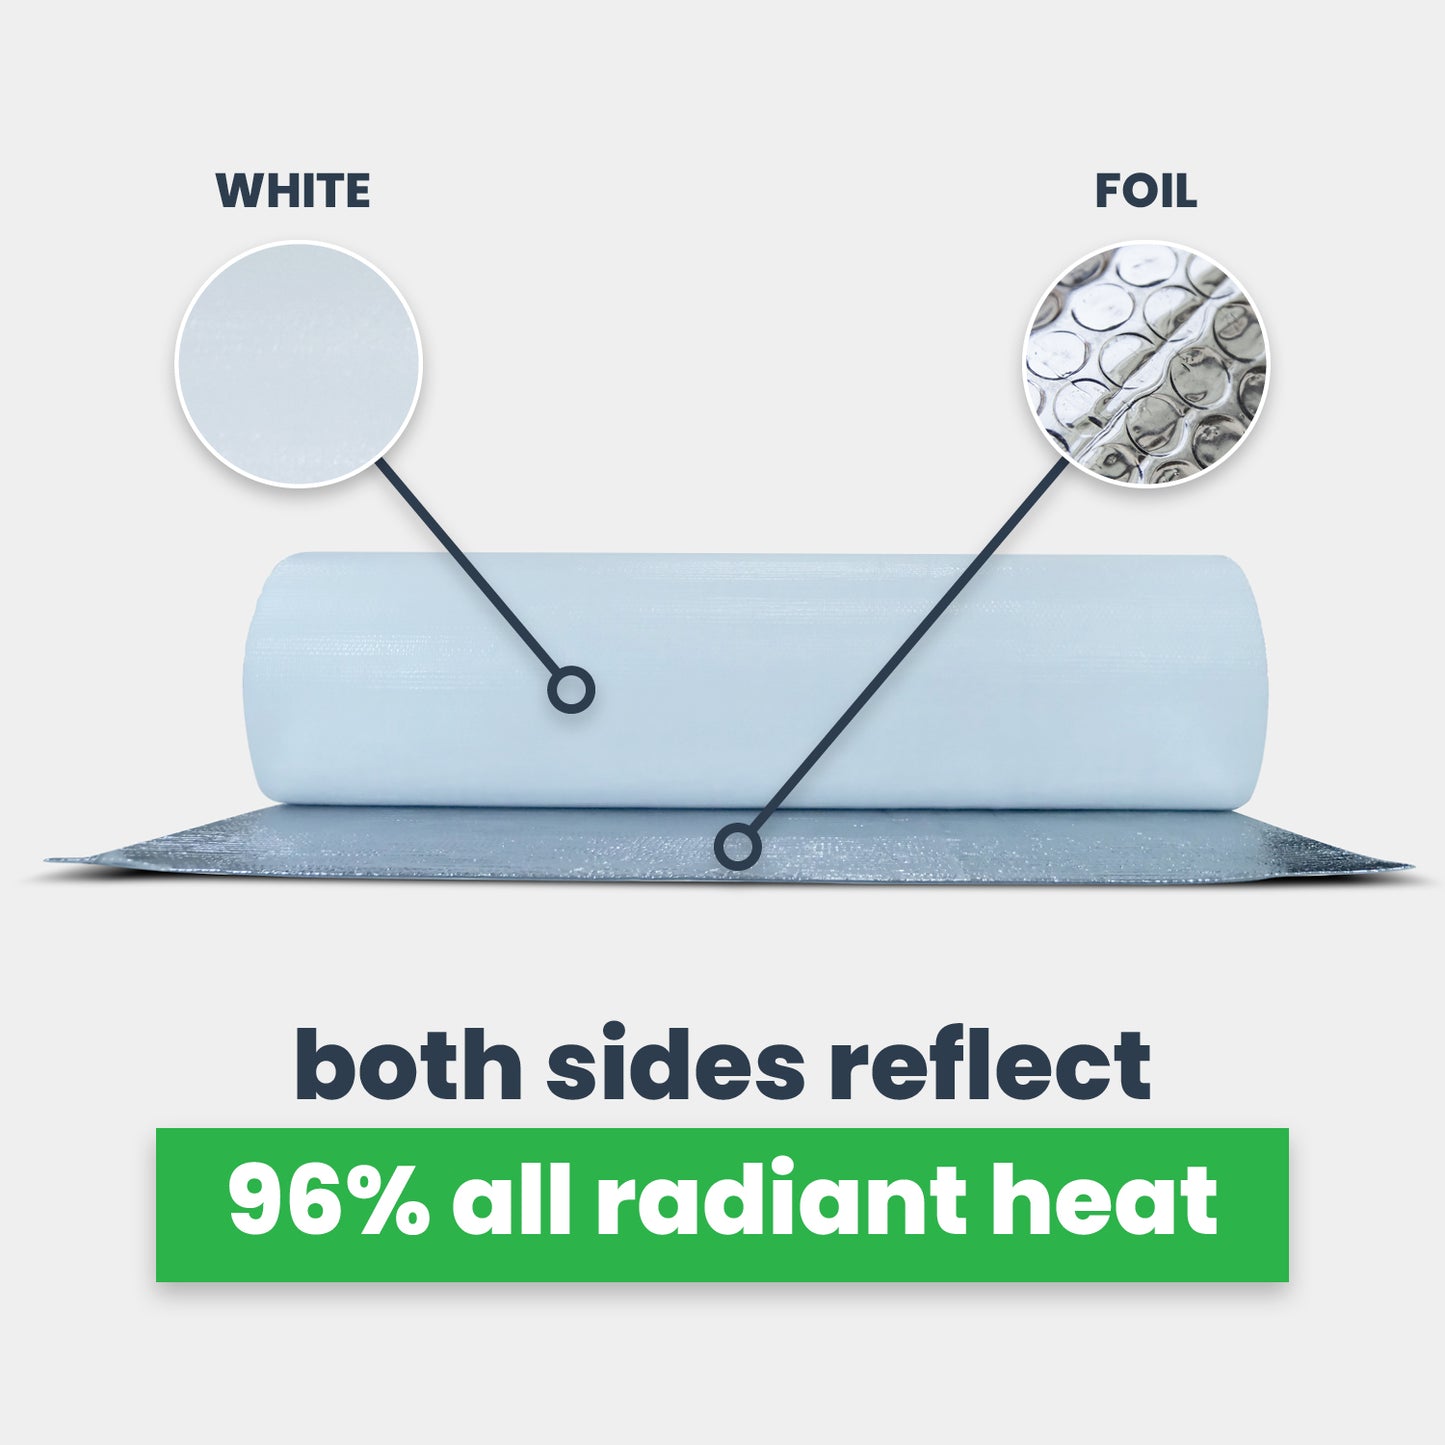 double bubble insulation white foil both sides reflect 96% radiant heat